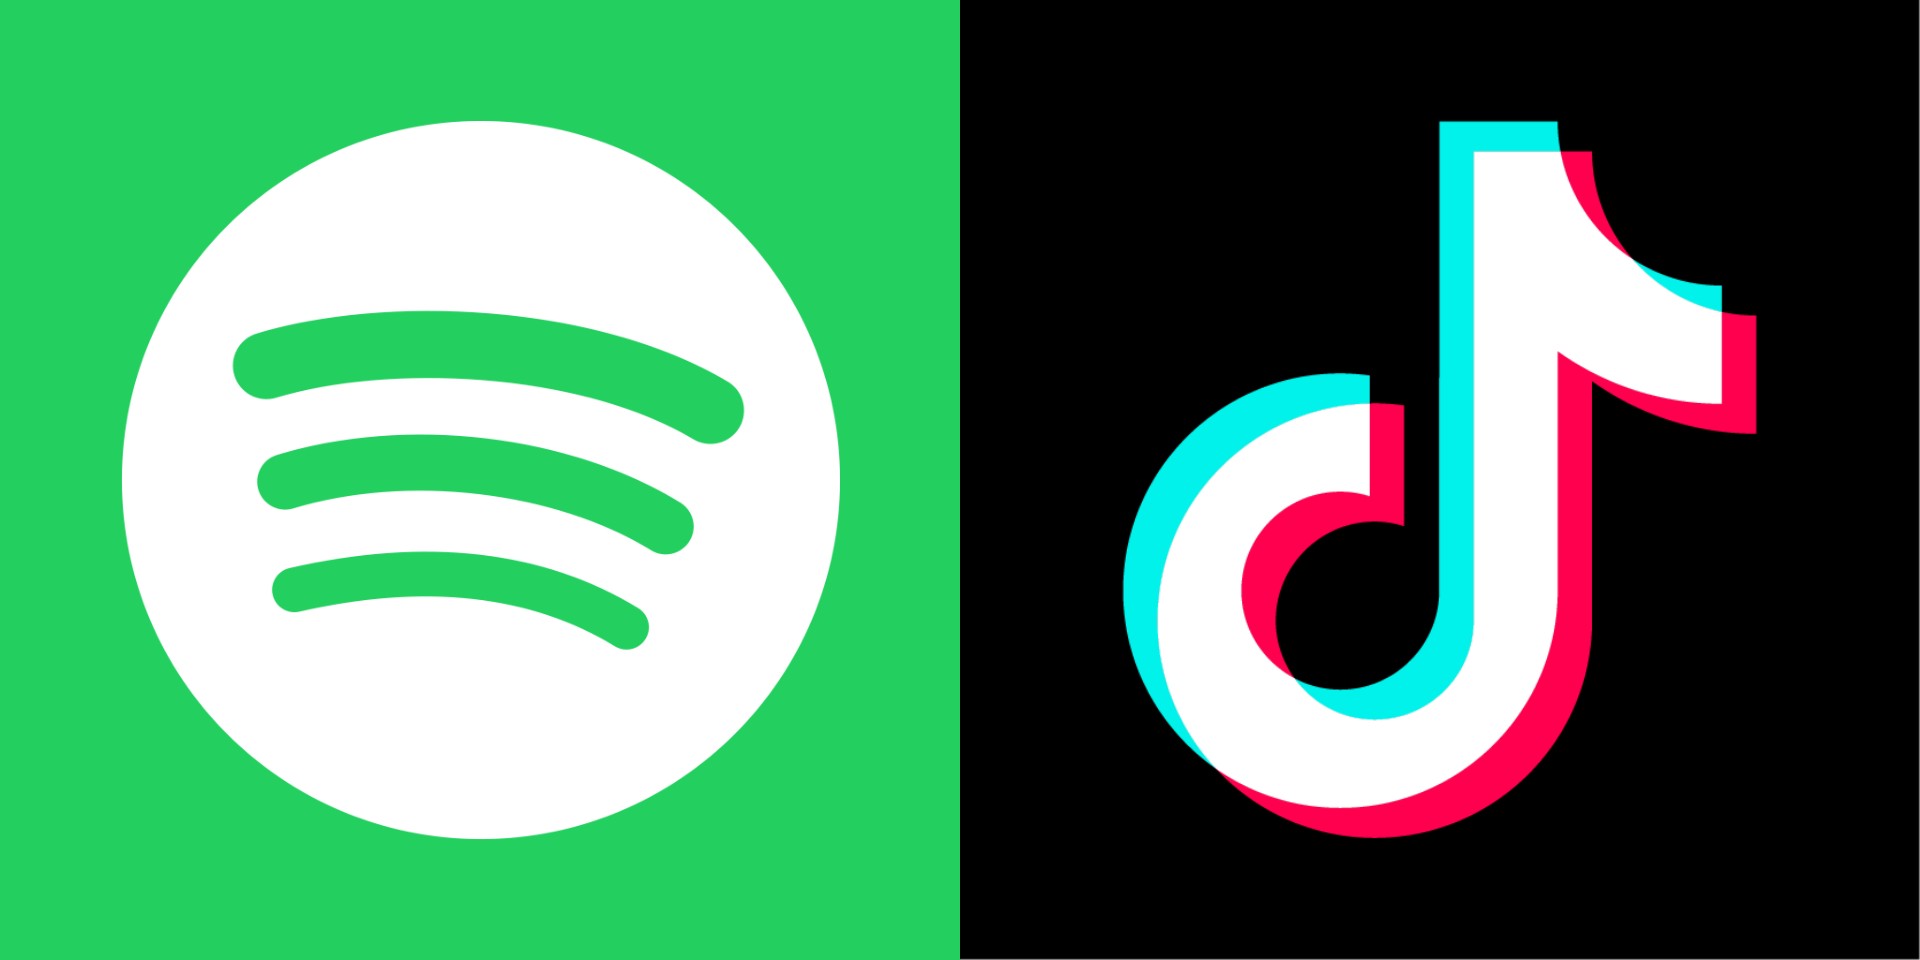 Spotify and TikTok collaborate to offer free Premium trials to users in the UK, Italy, Germany, and more